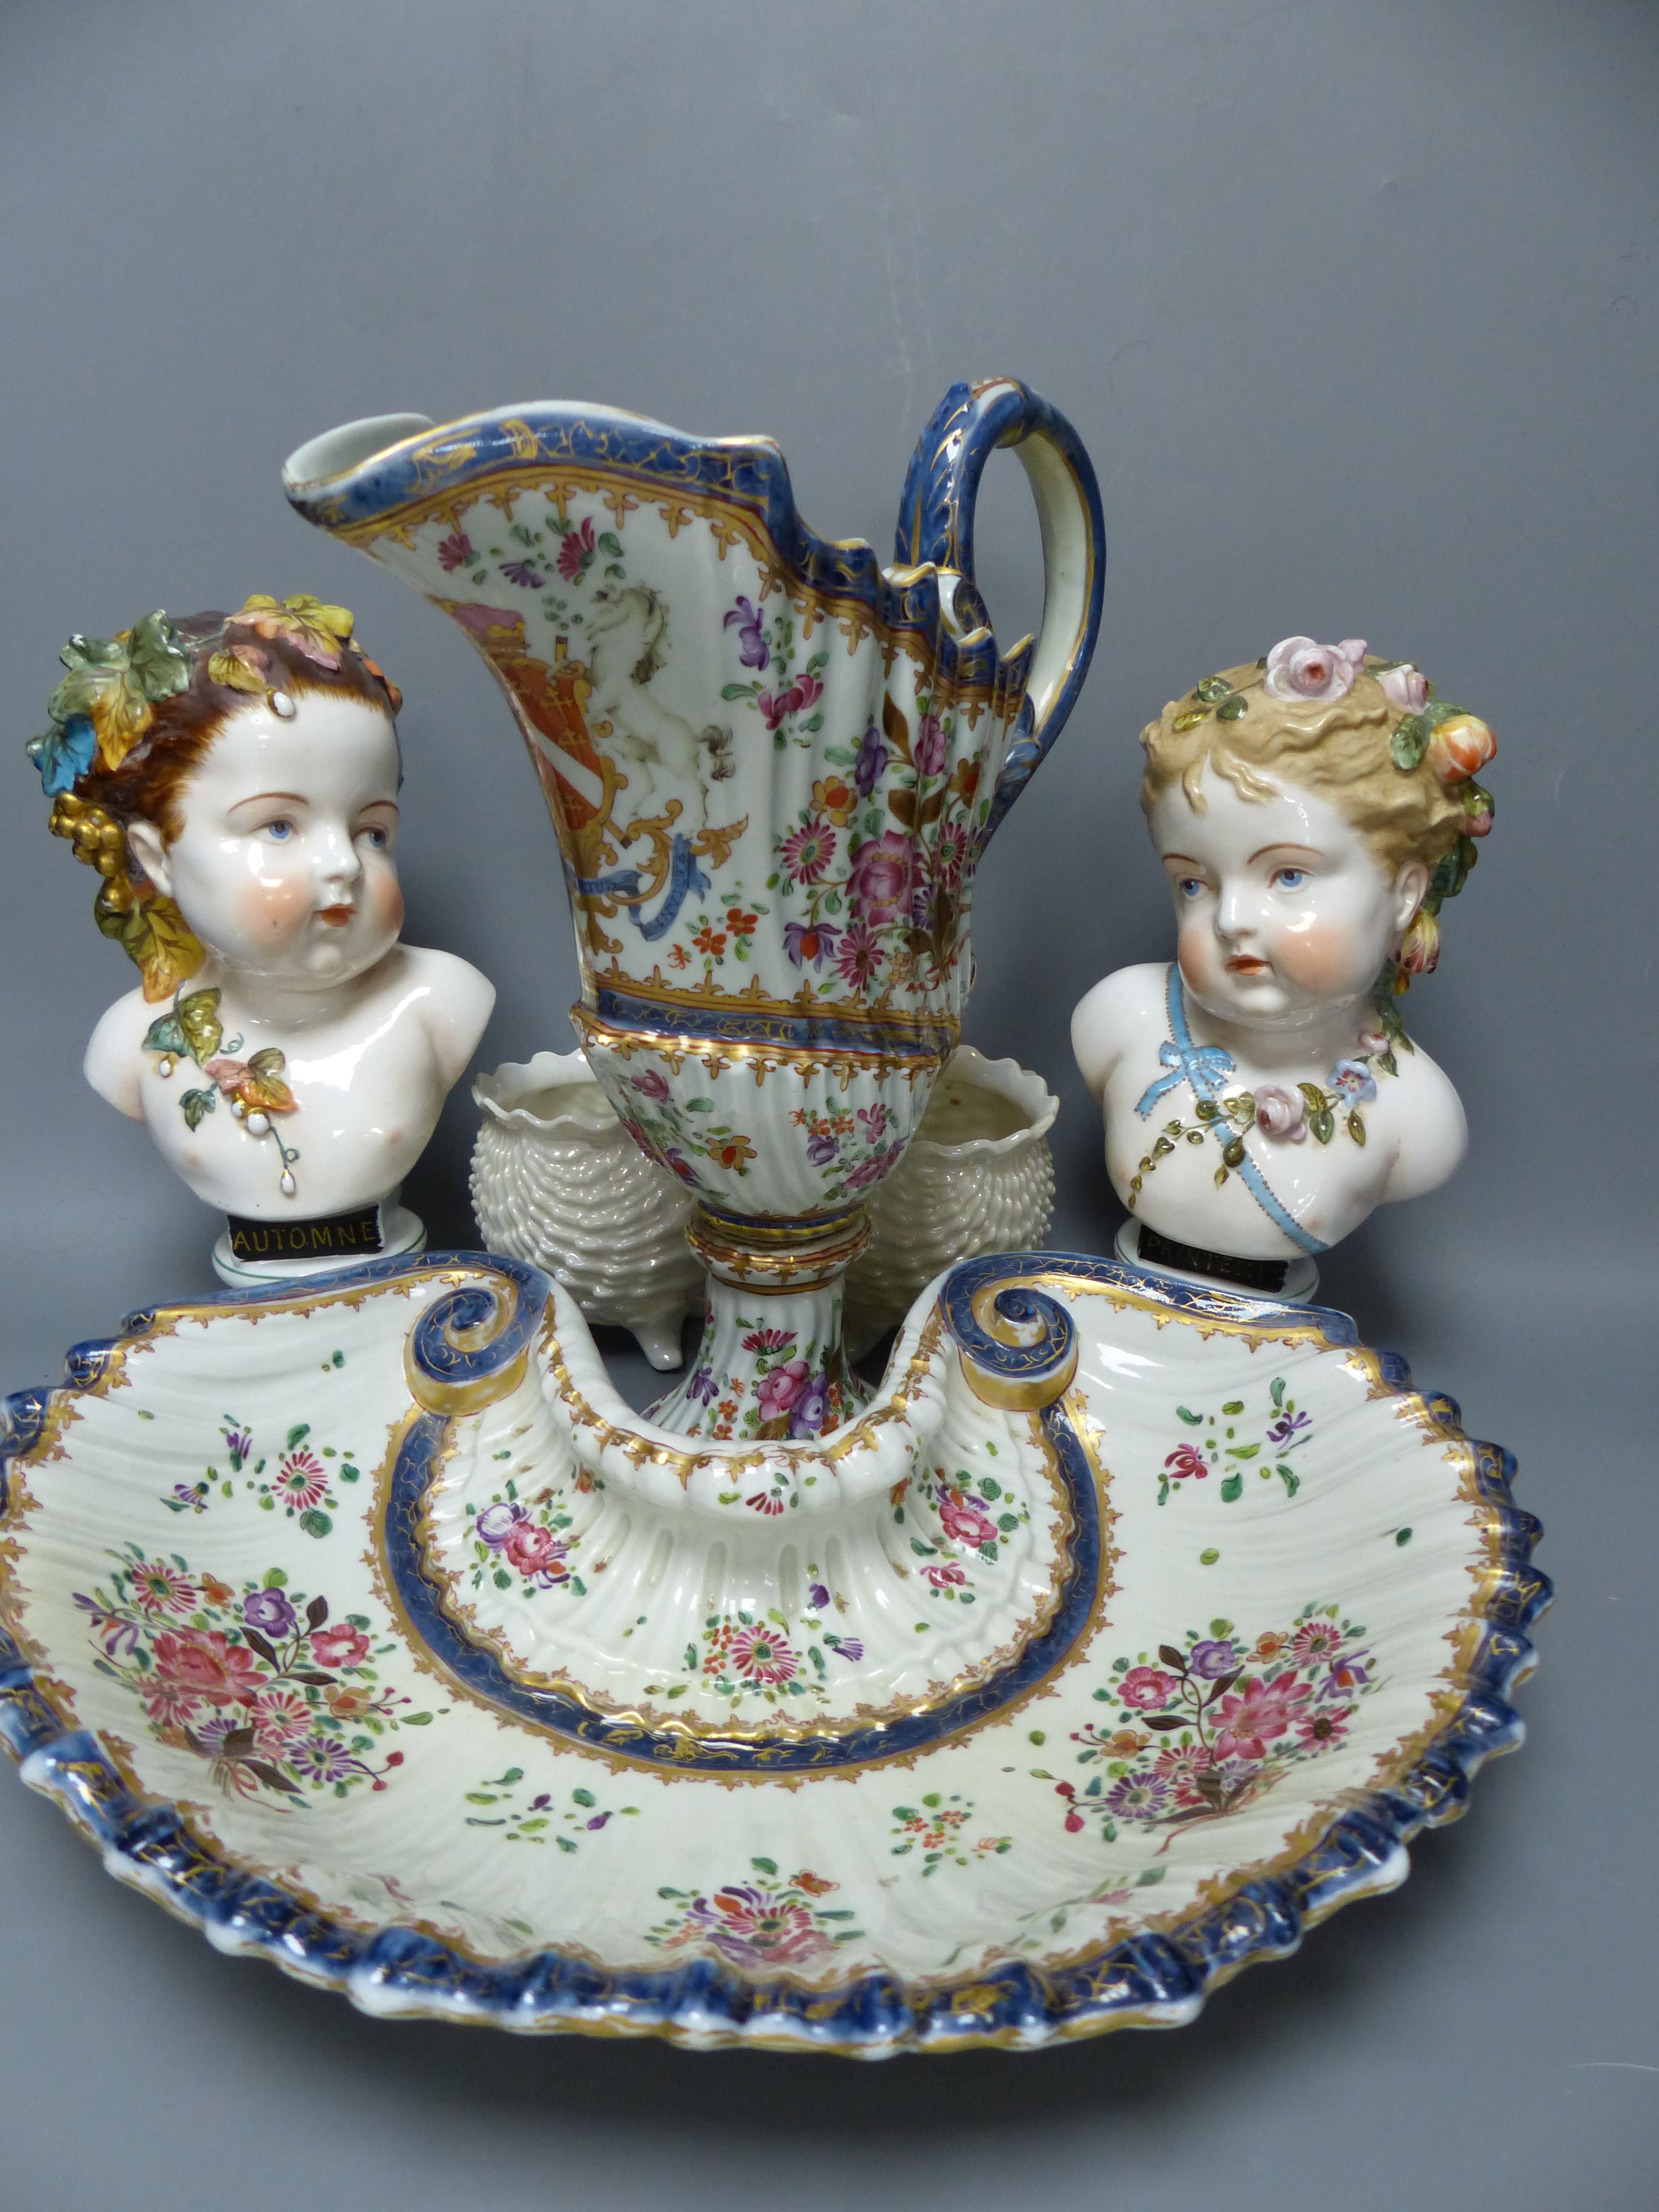 A pair of French porcelain busts Automne and Printemps, a Samson ewer and basin in the Chinese export style and a pair Belleek styl